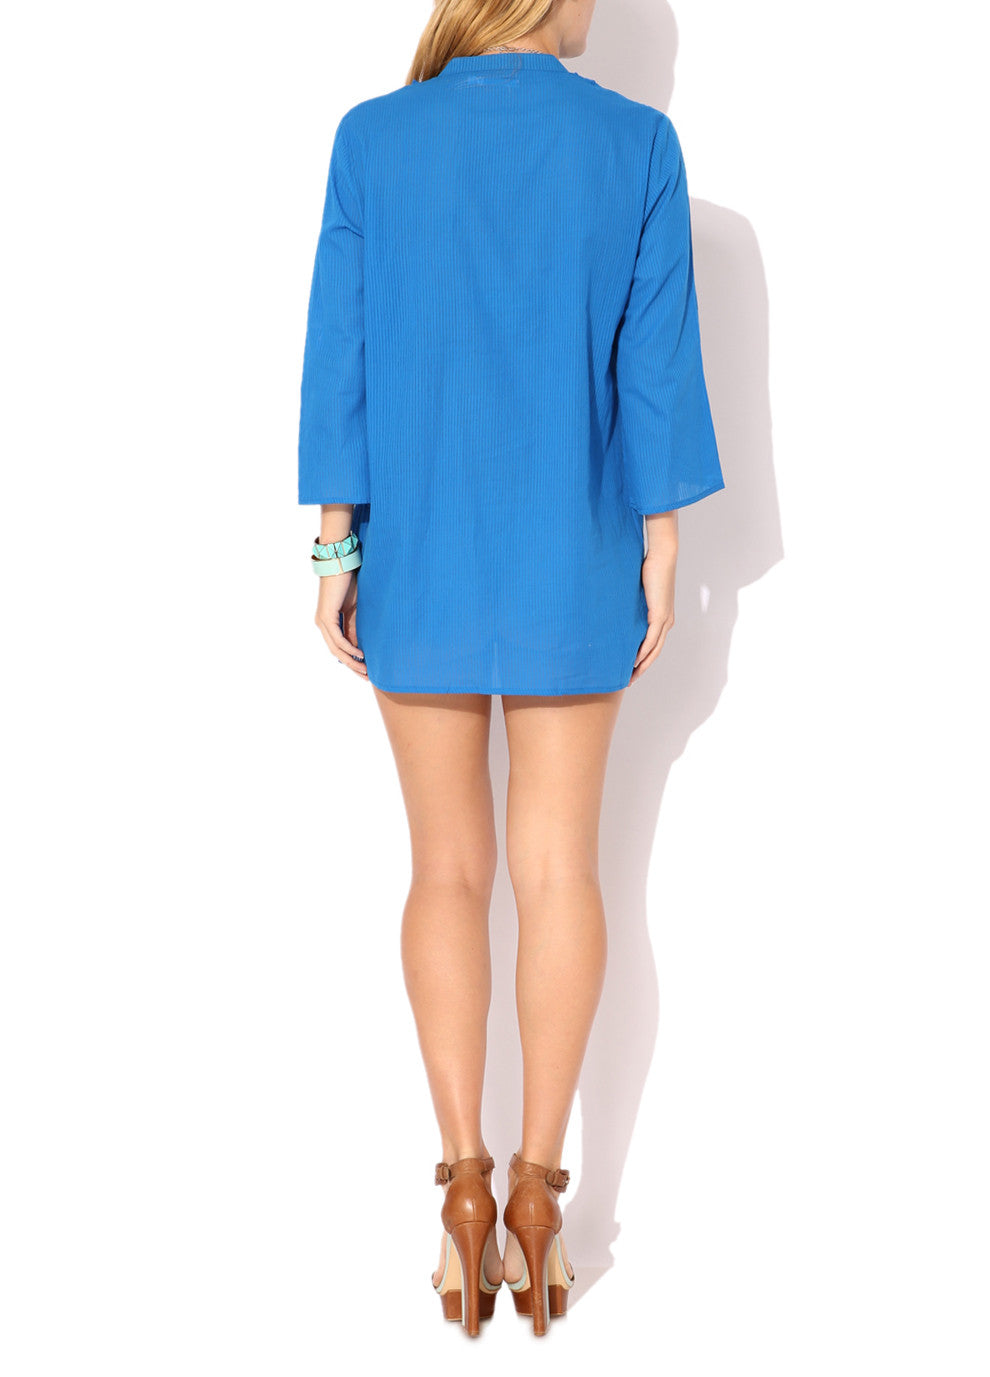 Frilly Beach Tunic in pure cotton KV284